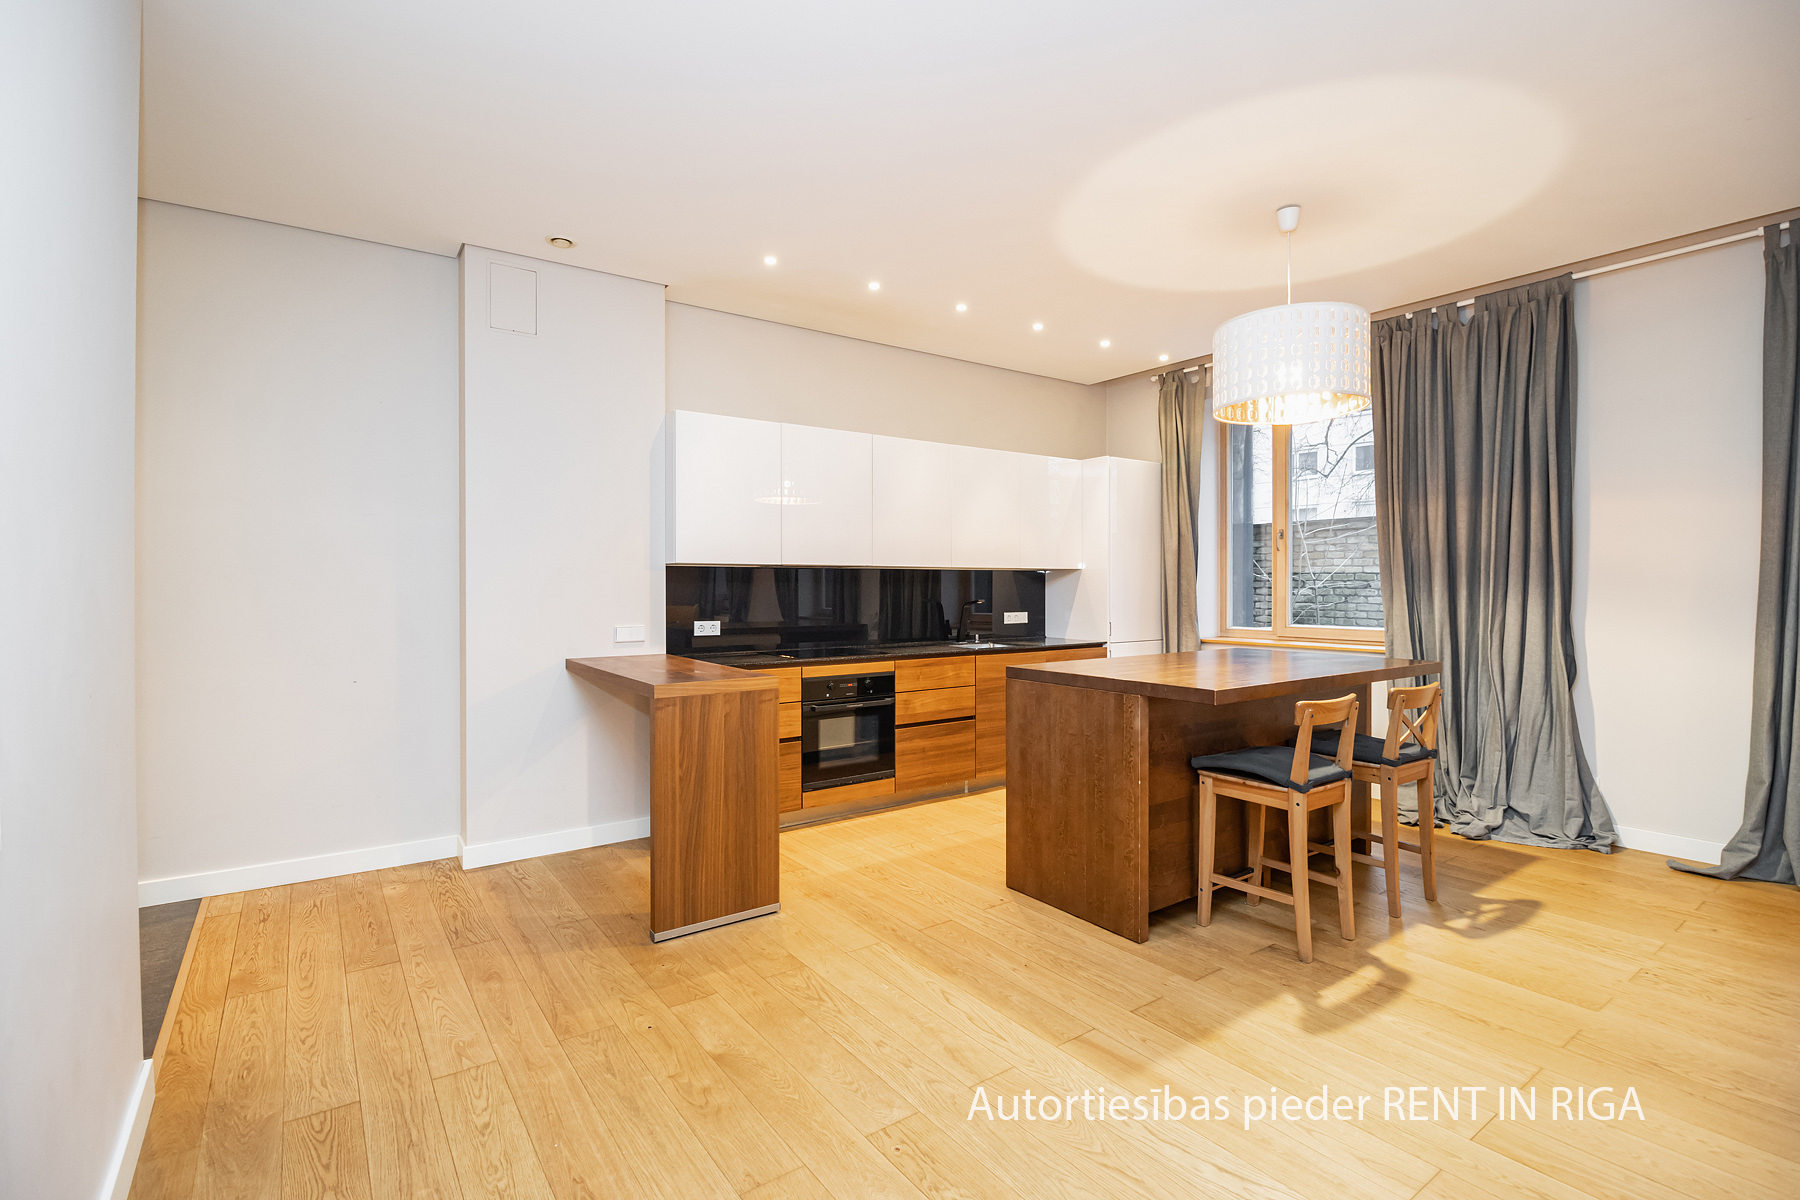 Apartment for rent, Liepājas street 2 - Image 1